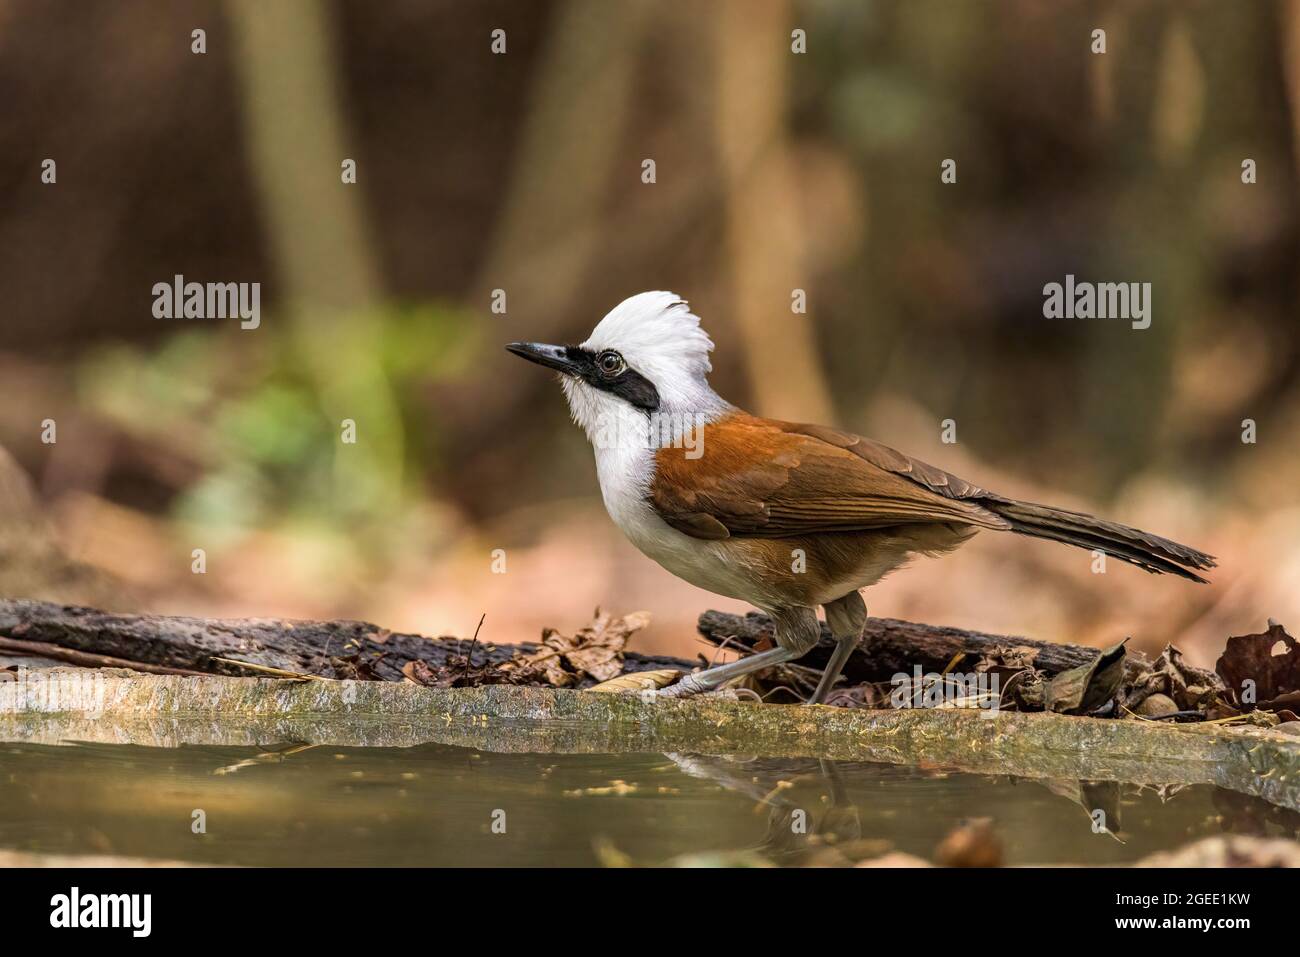 White-crested laughingthrush (Garrulax leucolophus), perched on a wooden log, in the wild Stock Photo